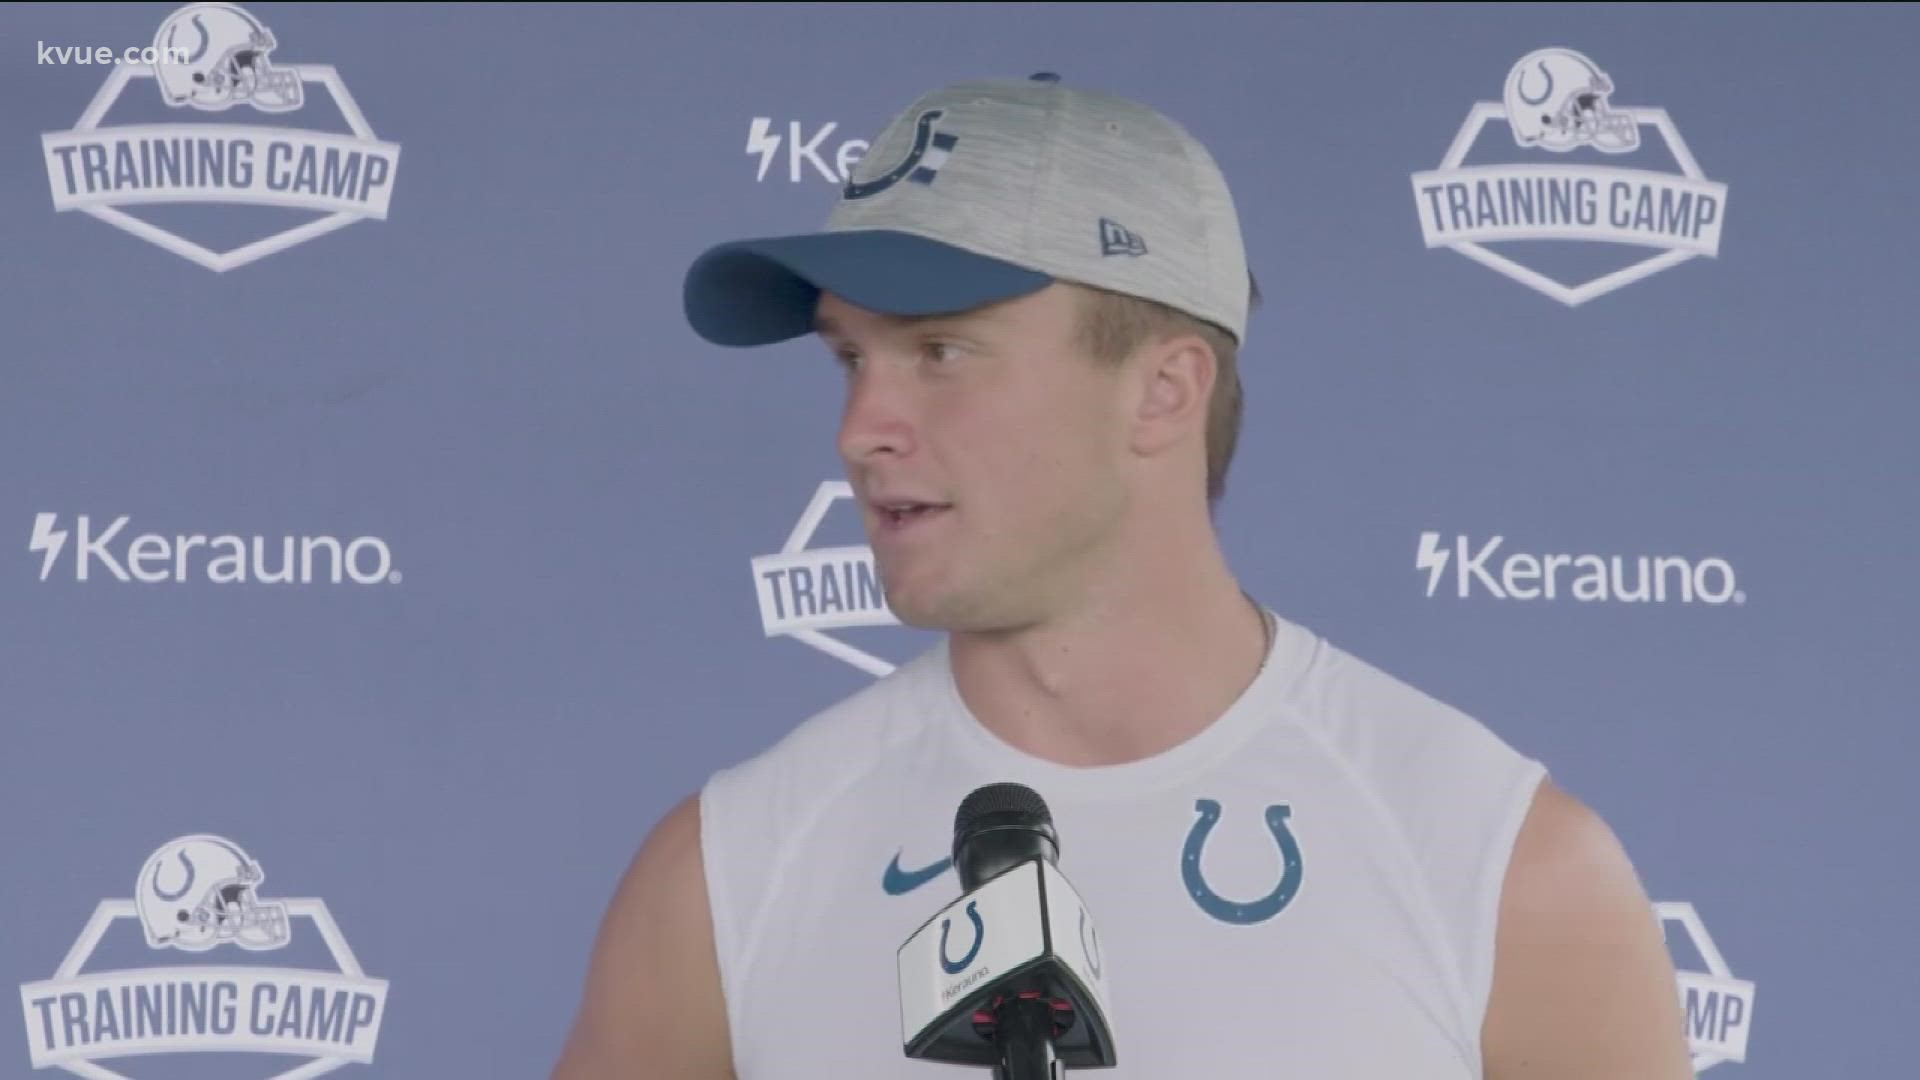 Sam Ehlinger is getting ready for his season with the Indianapolis Colts. He gave his insight on what makes the pros different from college football.